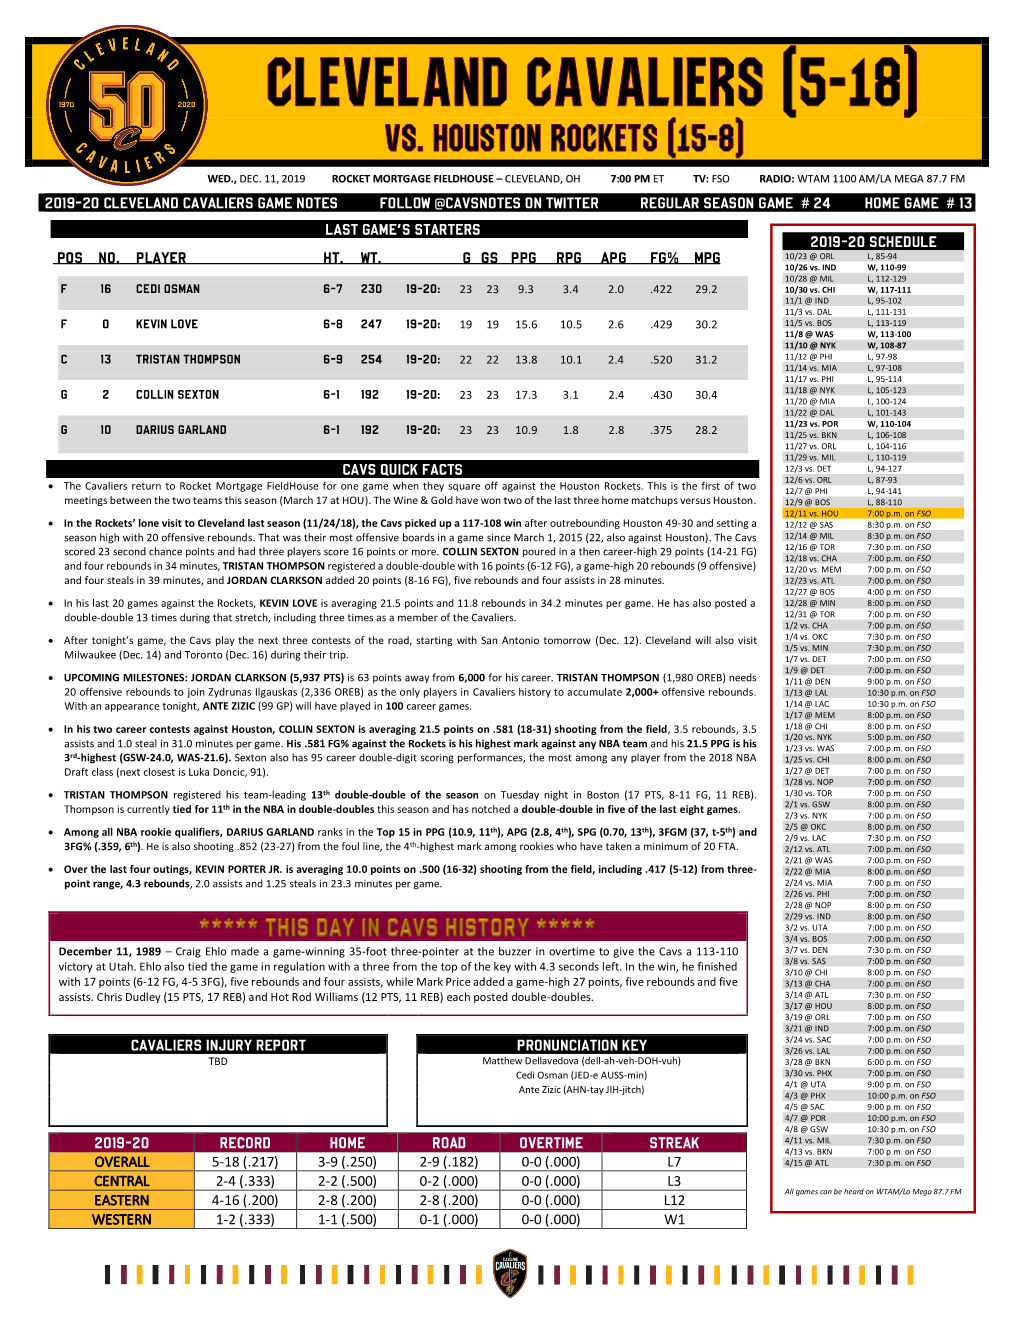 2019-20 Cleveland Cavaliers Game Notes Follow @Cavsnotes on Twitter Regular Season Game # 24 Home Game # 13 Cavs